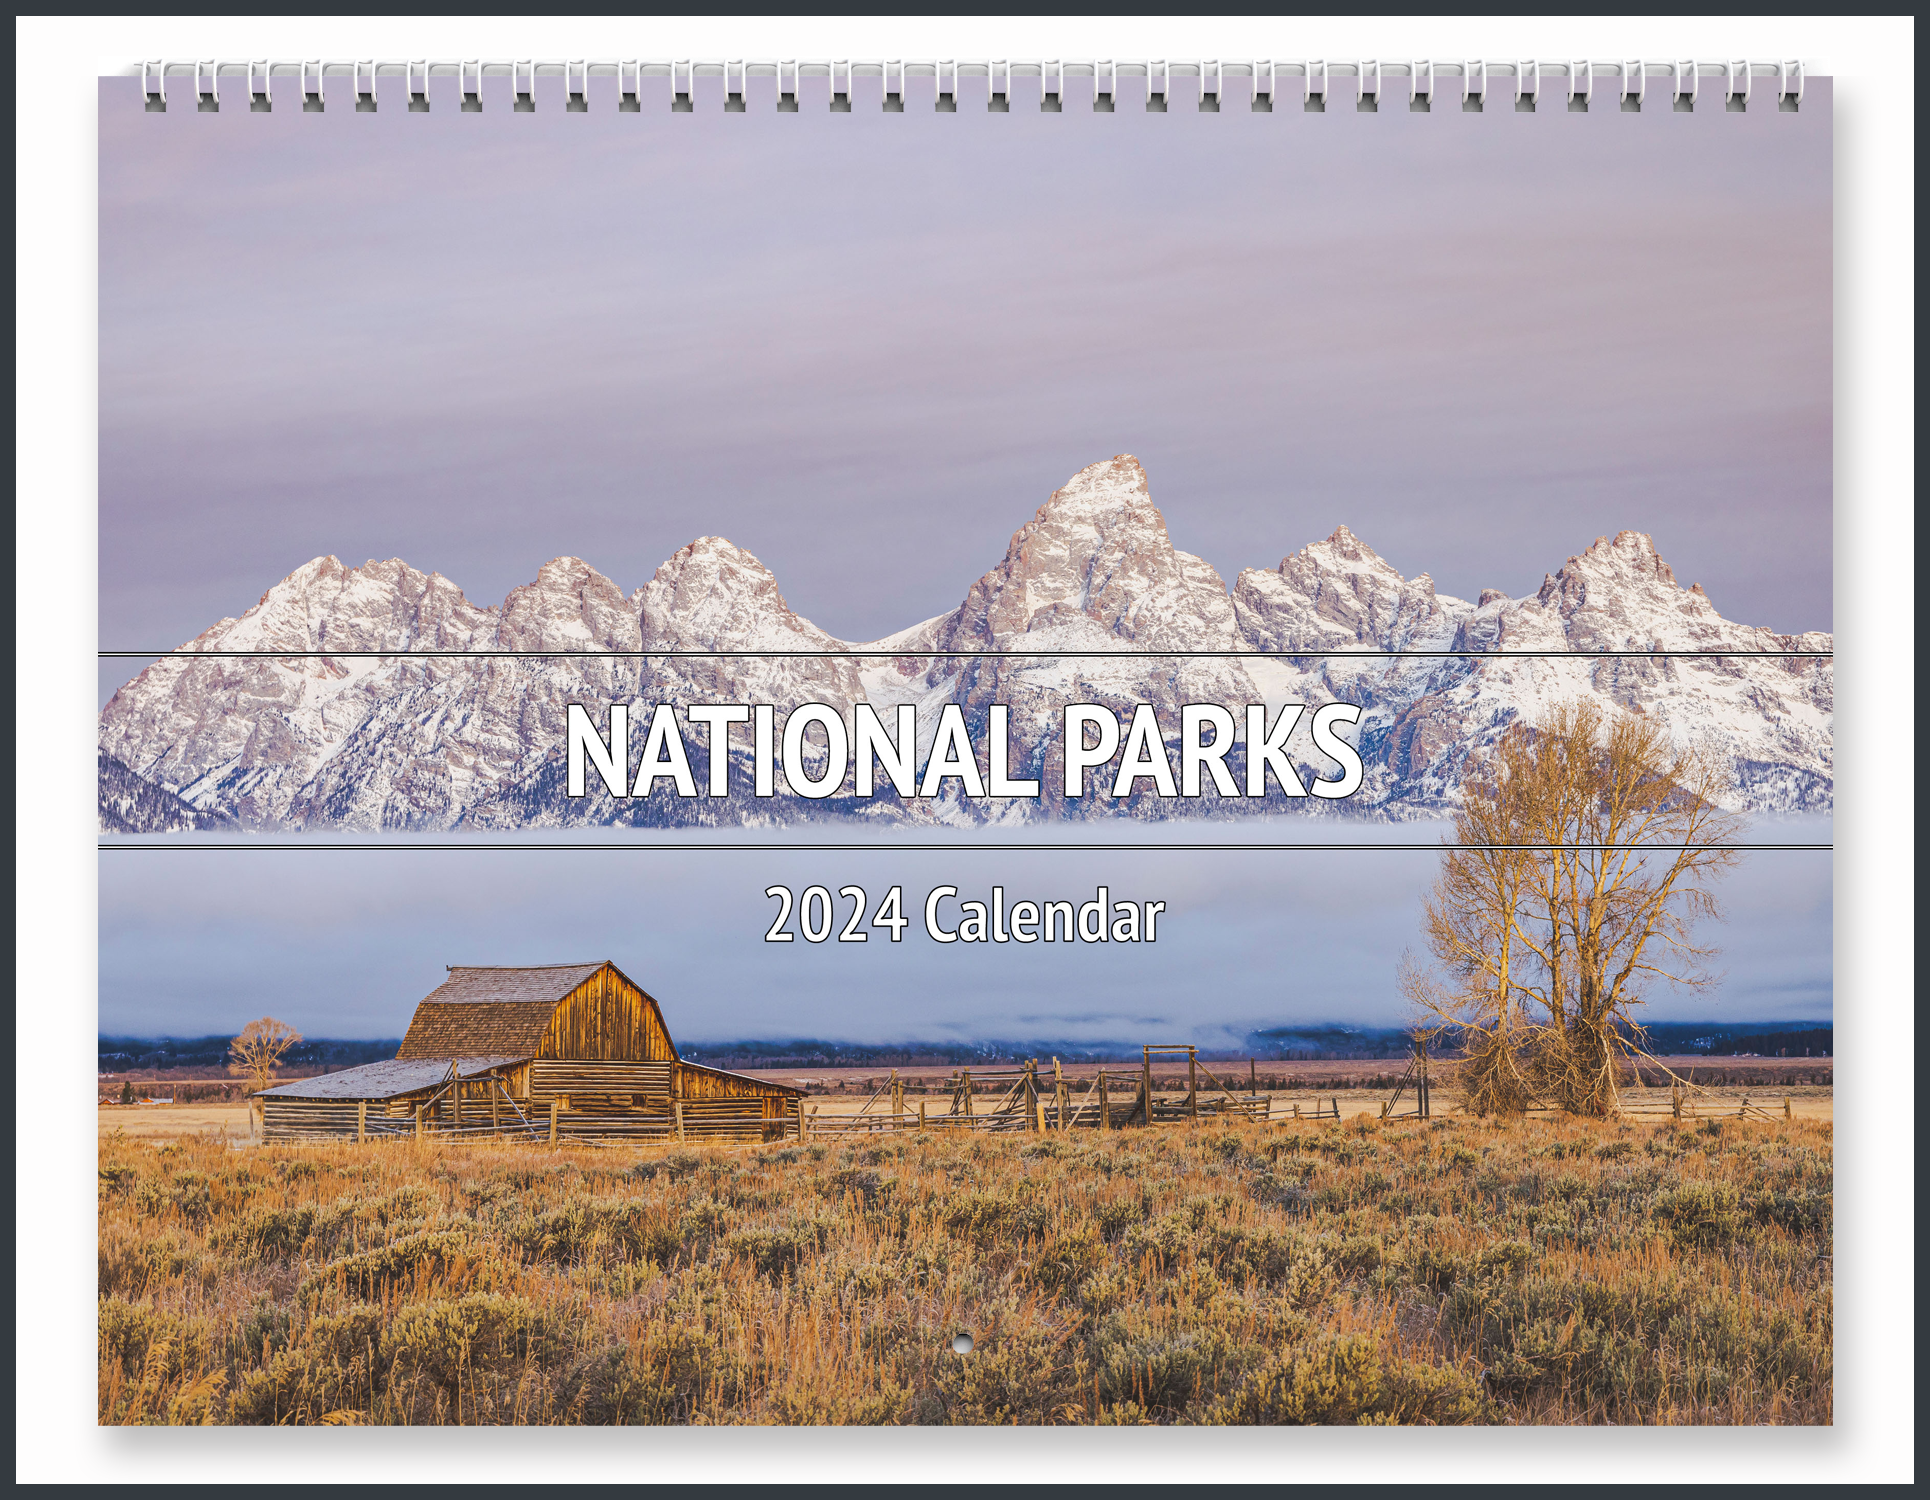 National Parks front view